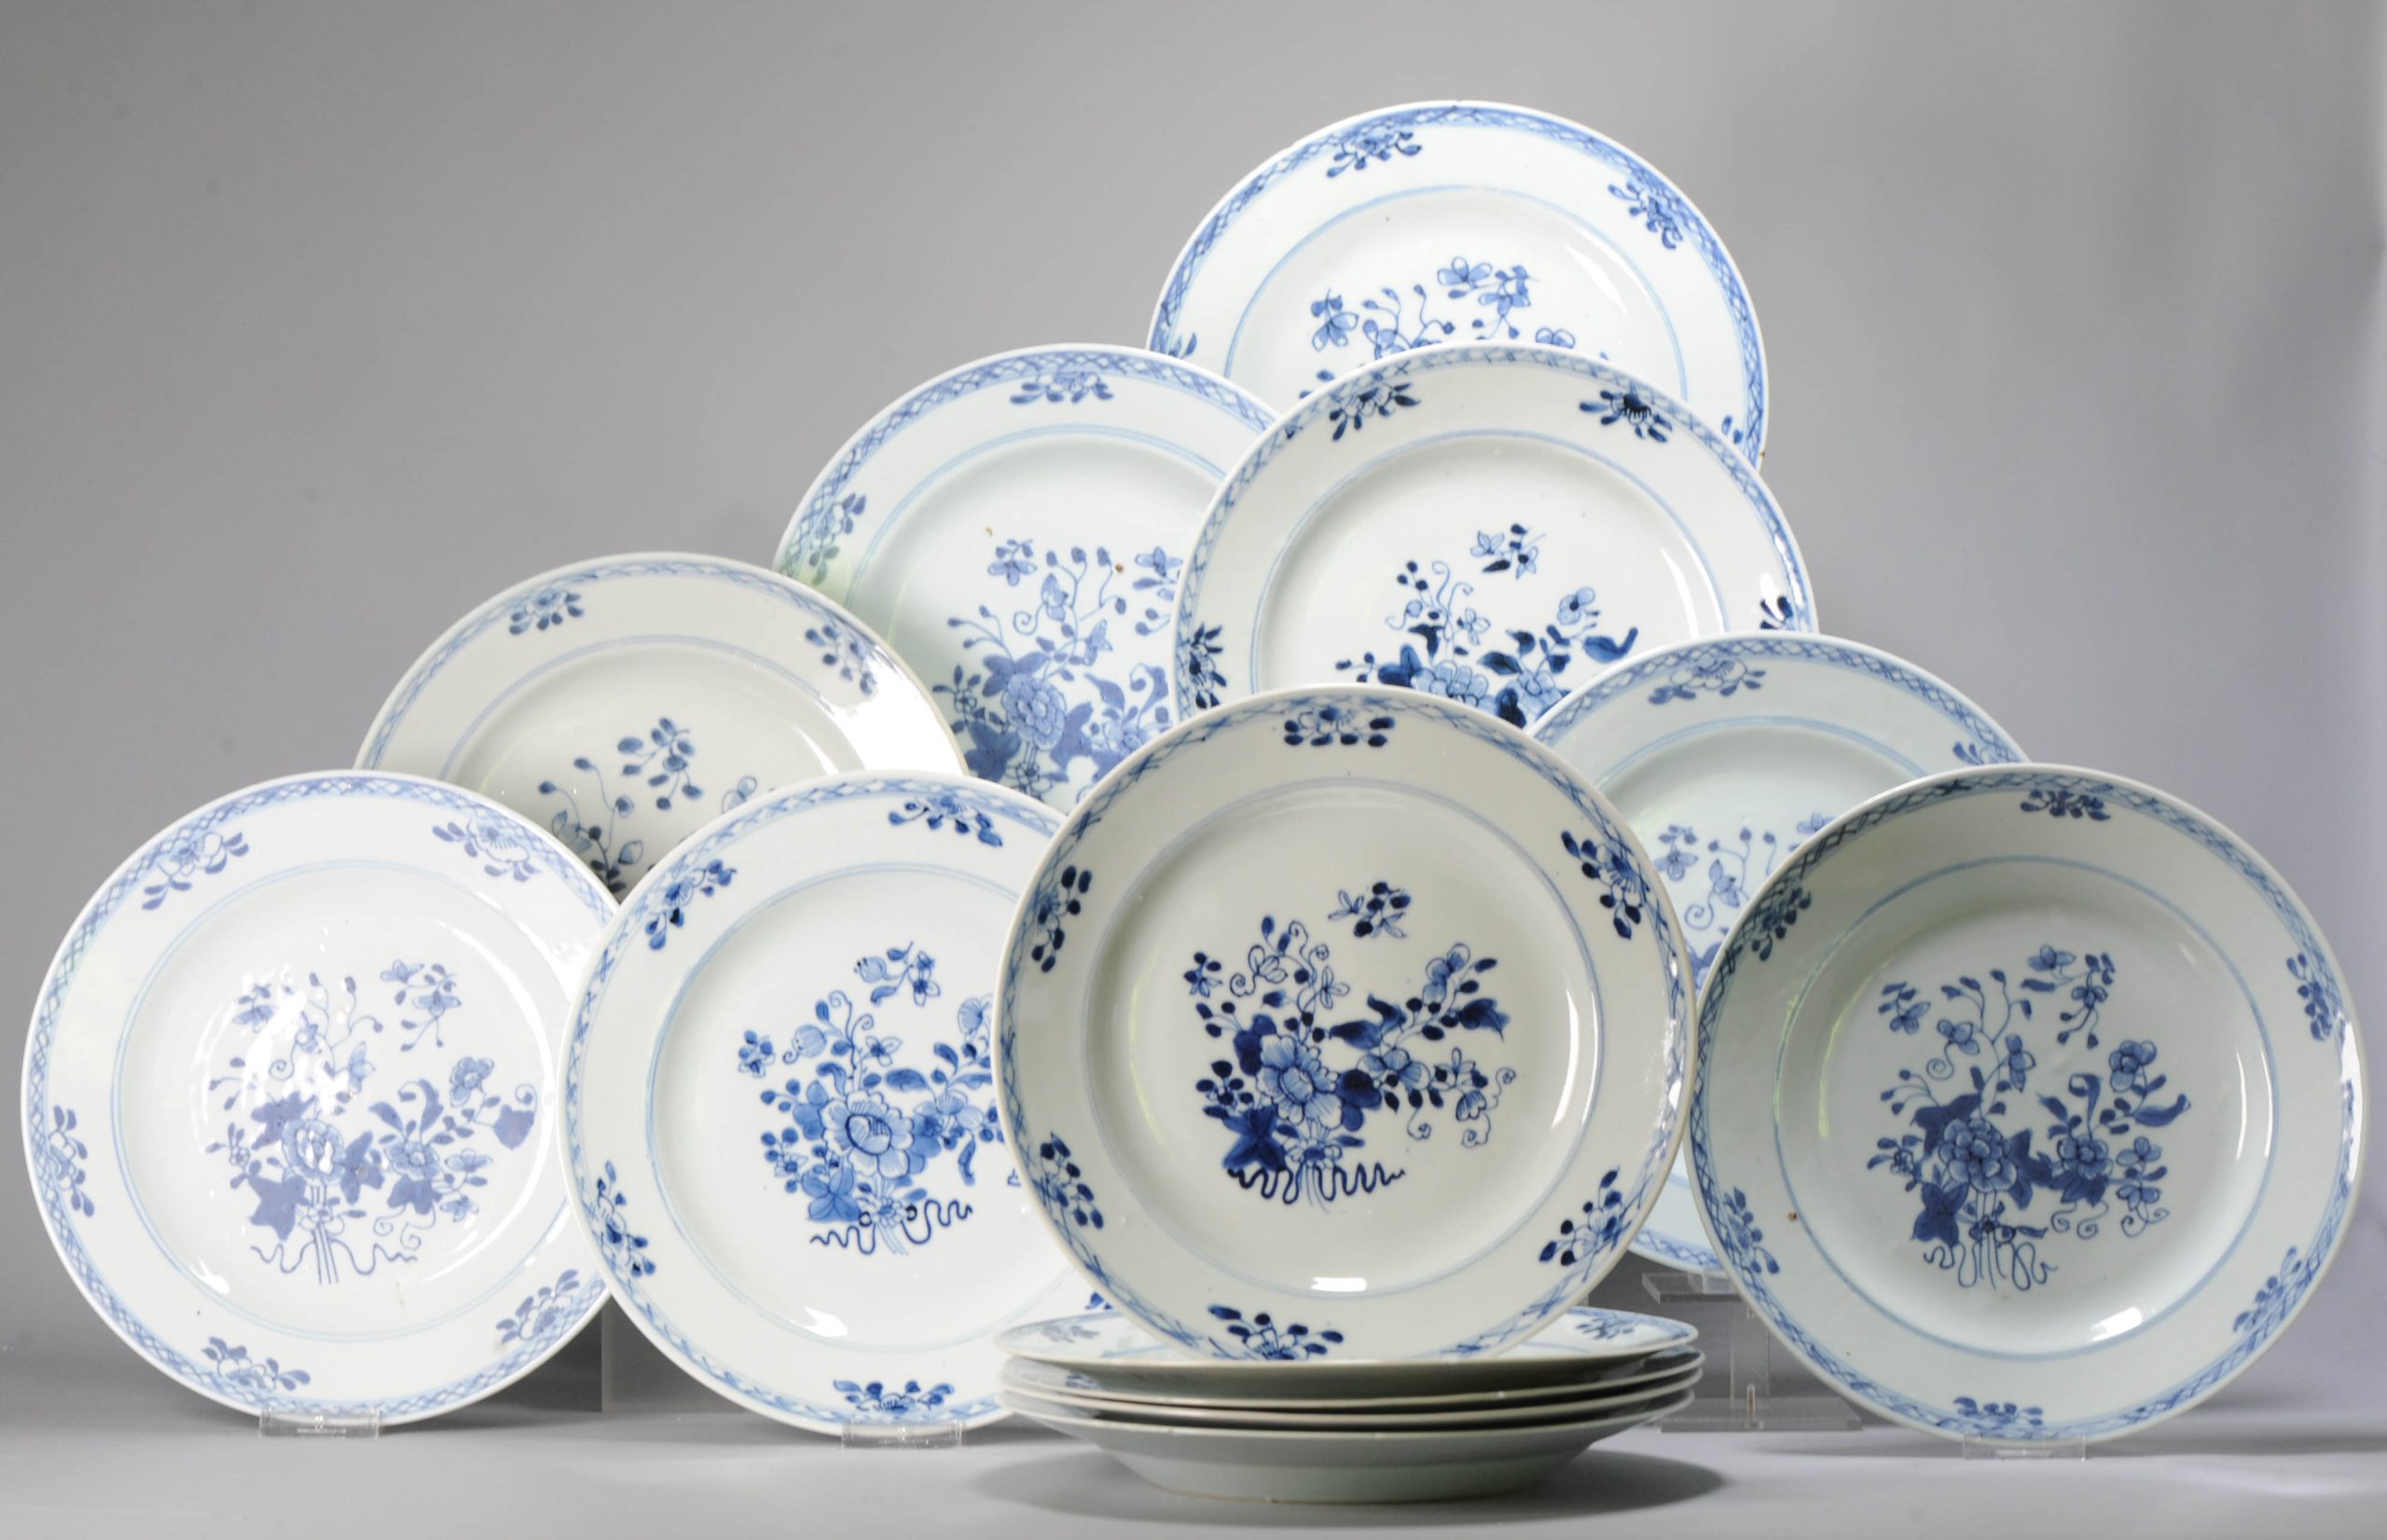 #13 Antique Chinese Porcelain 18th C Qing Period Blue White Set Dinner Plates